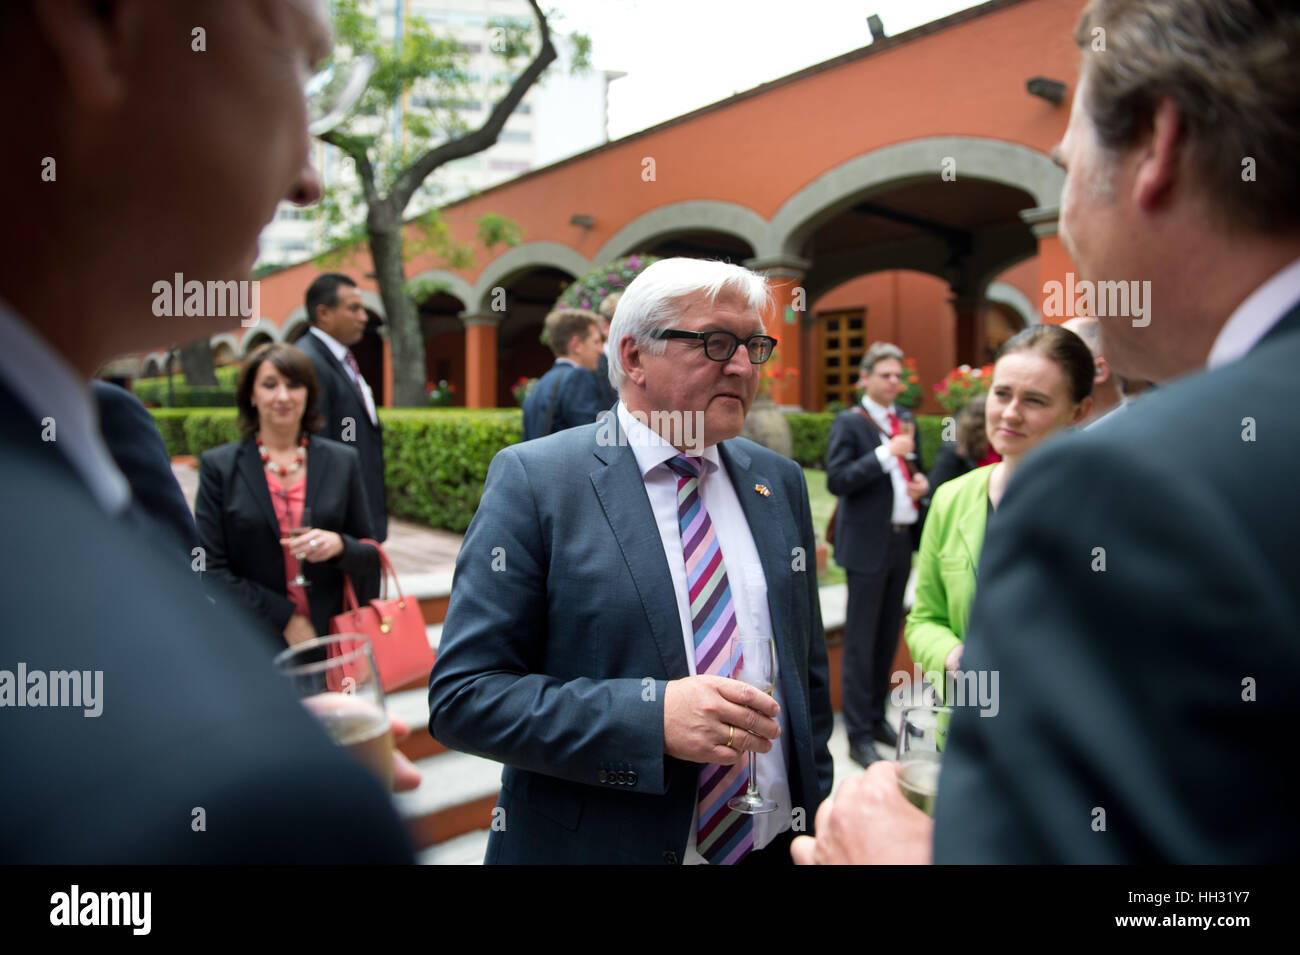 FILE - A file picture dated 17 July 2014 shows German Foreign Minister Frank-Walter Steinmeier (c, SPD) speaking to business representatives on the occasion of the signing of a new Kaufvertrag (lit. purchase contract) for the new BMW factory location in Mexico City, Mexico. Car manufacturer BMW plans to invest around 1 billion dollars in a new factory in San Luis Potosi. Photo: Bernd von Jutrczenka/dpa Stock Photo